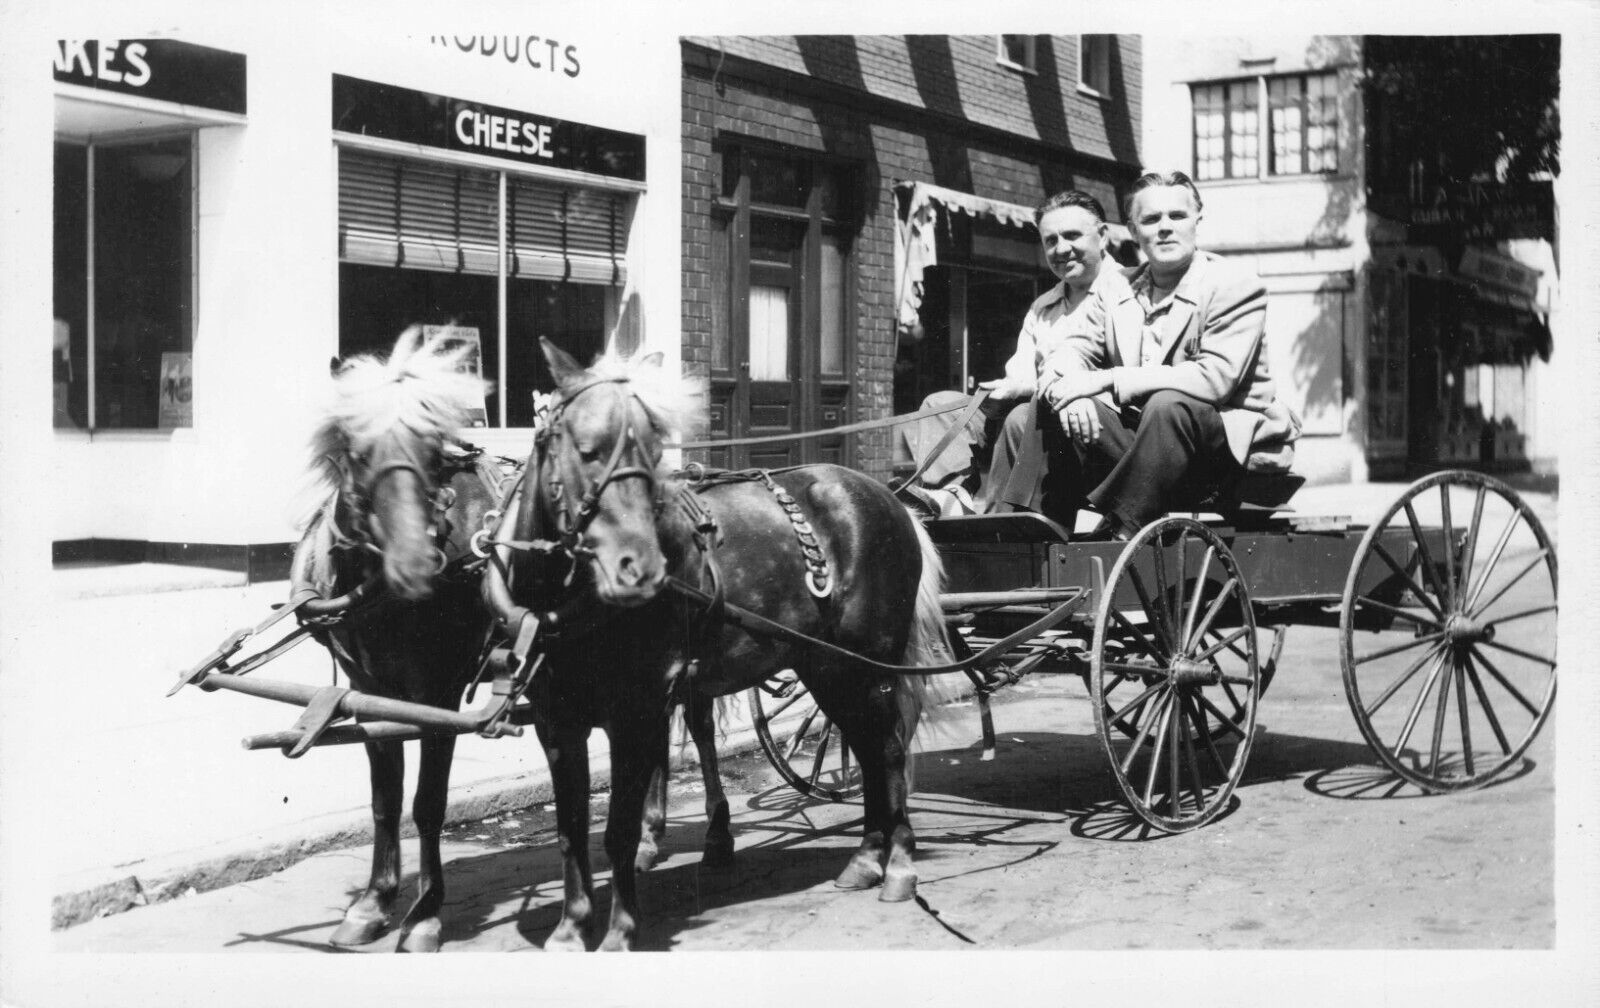 RPPC Two Men in Buggy Drawn by 2 Ponies Cheese Store Real Photo Postcard c 1930s